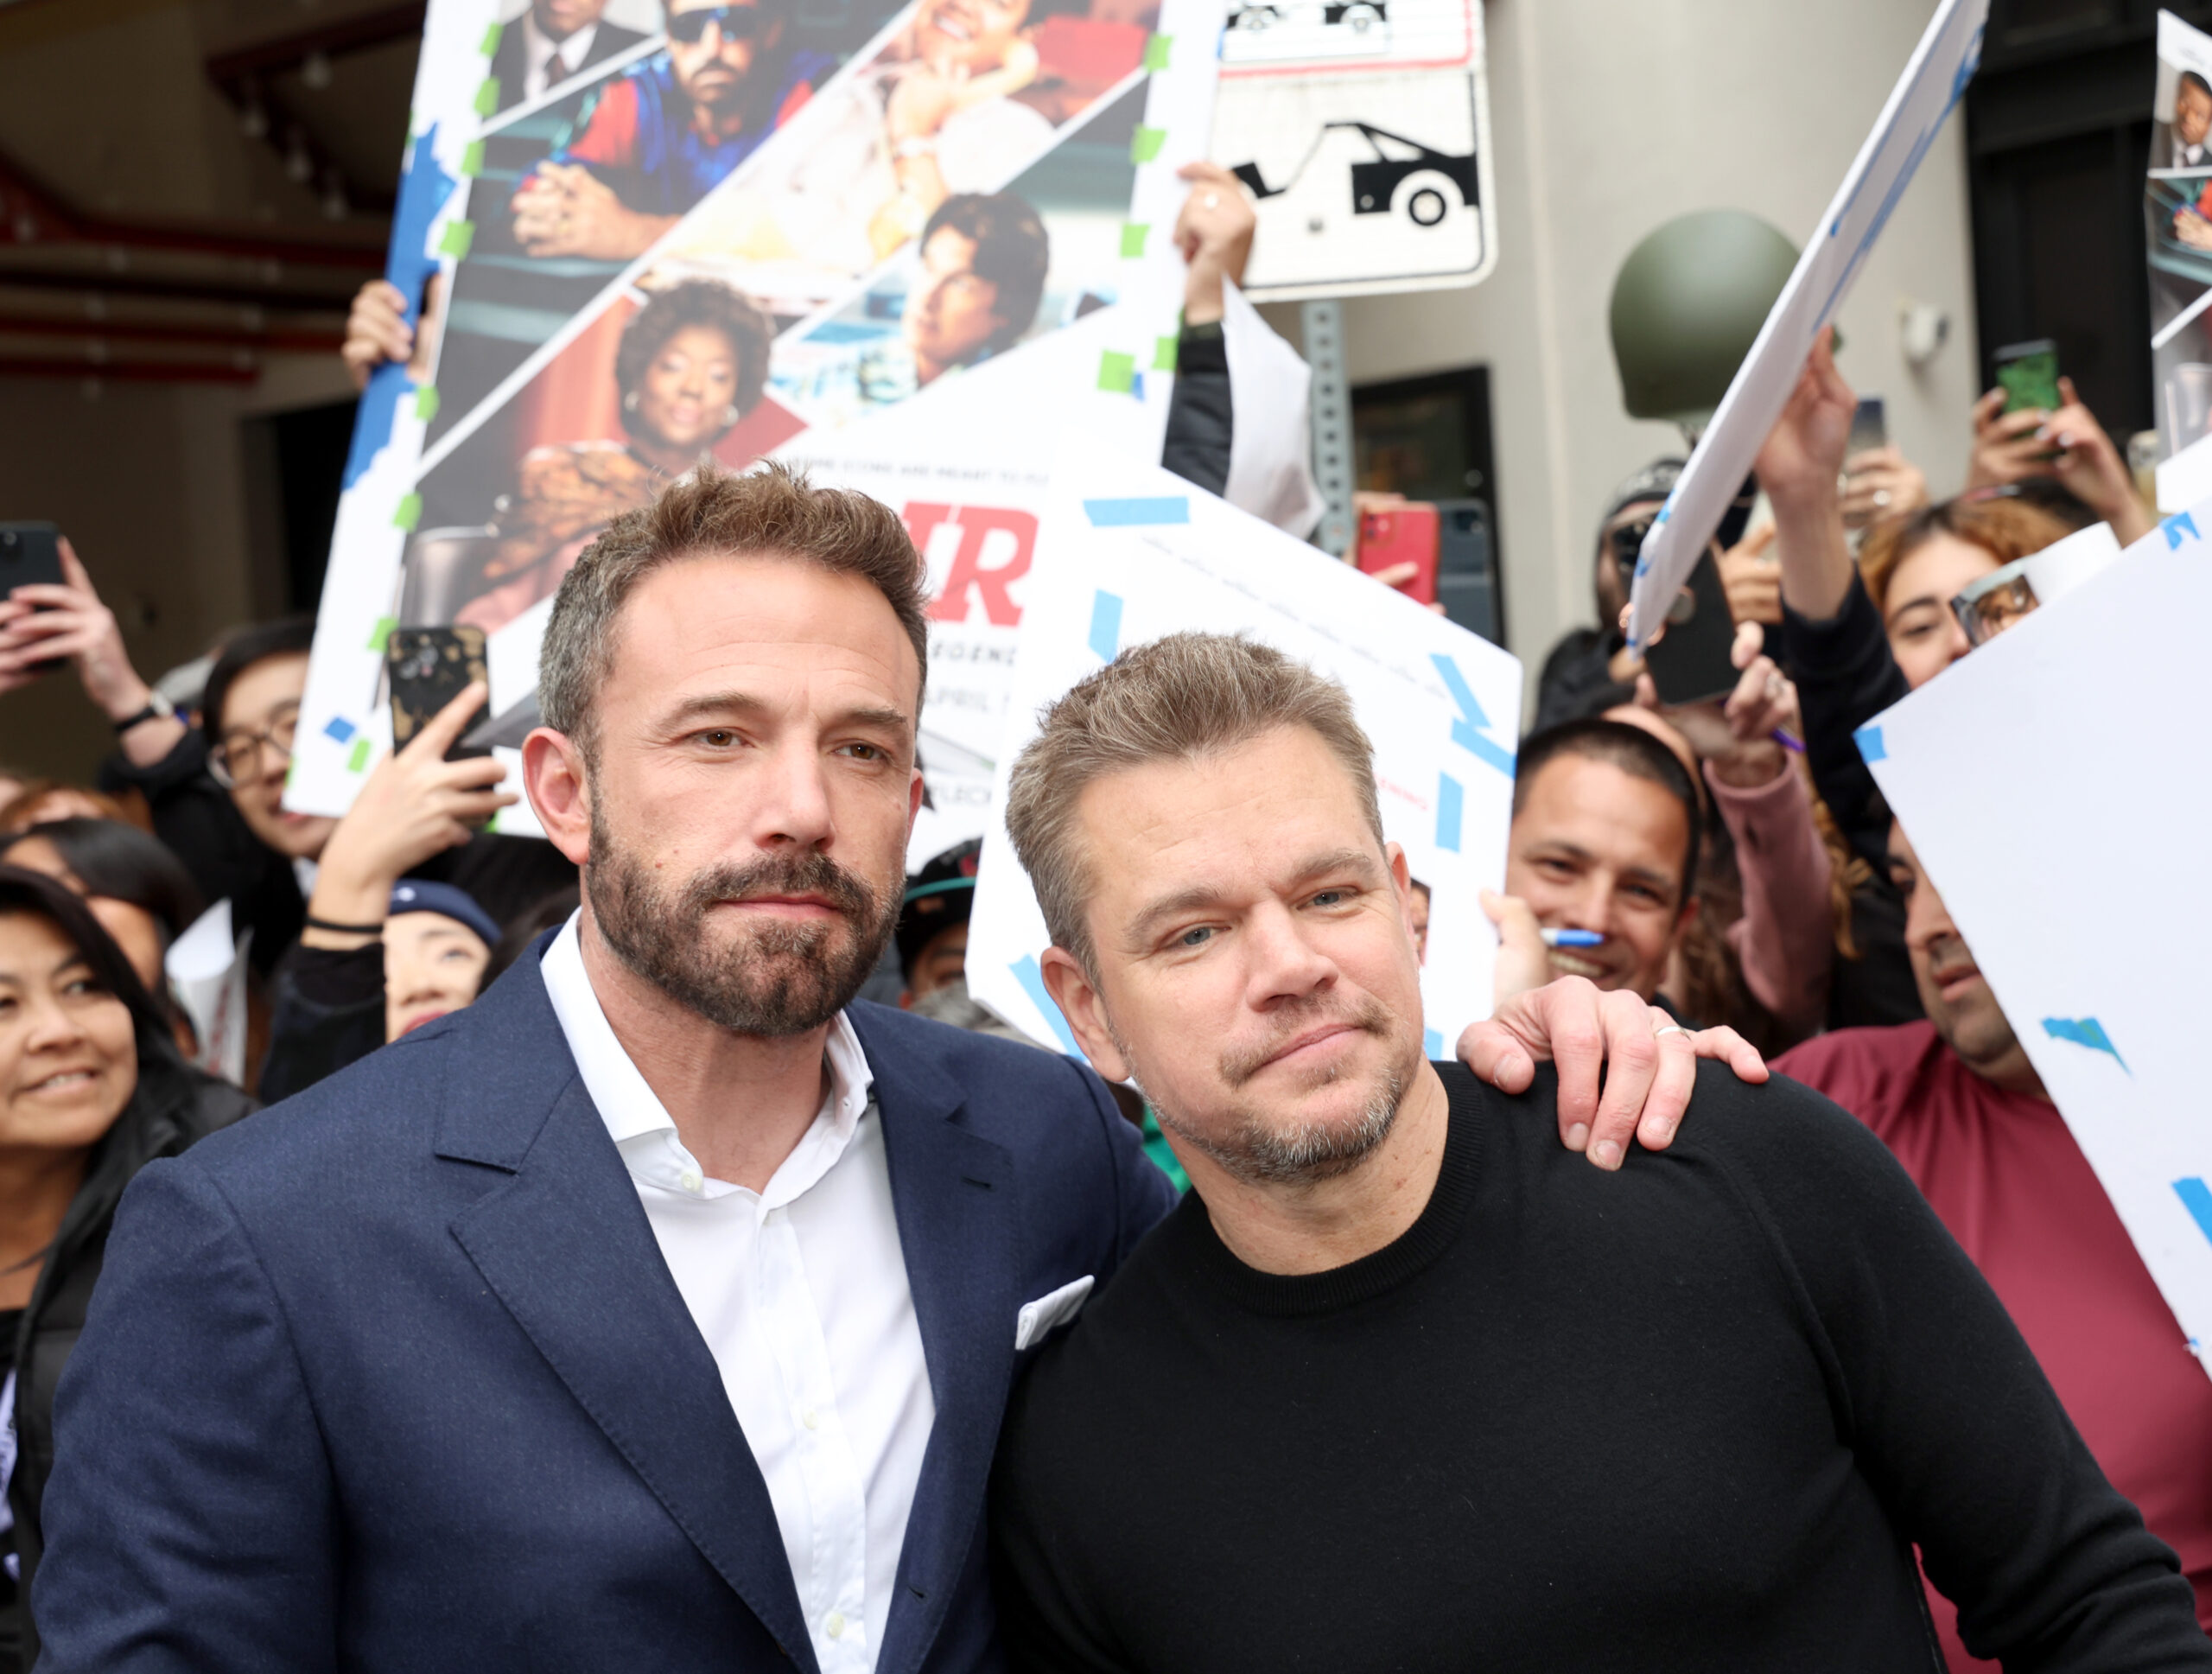 AUSTIN, TEXAS - MARCH 18: Ben Affleck (L) and Matt Damon attend the world premiere of "Air" at the Paramount Theatre during the 2023 SXSW Conference And Festival on March 18, 2023 in Austin, Texas. (Photo by Gary Miller/WireImage)